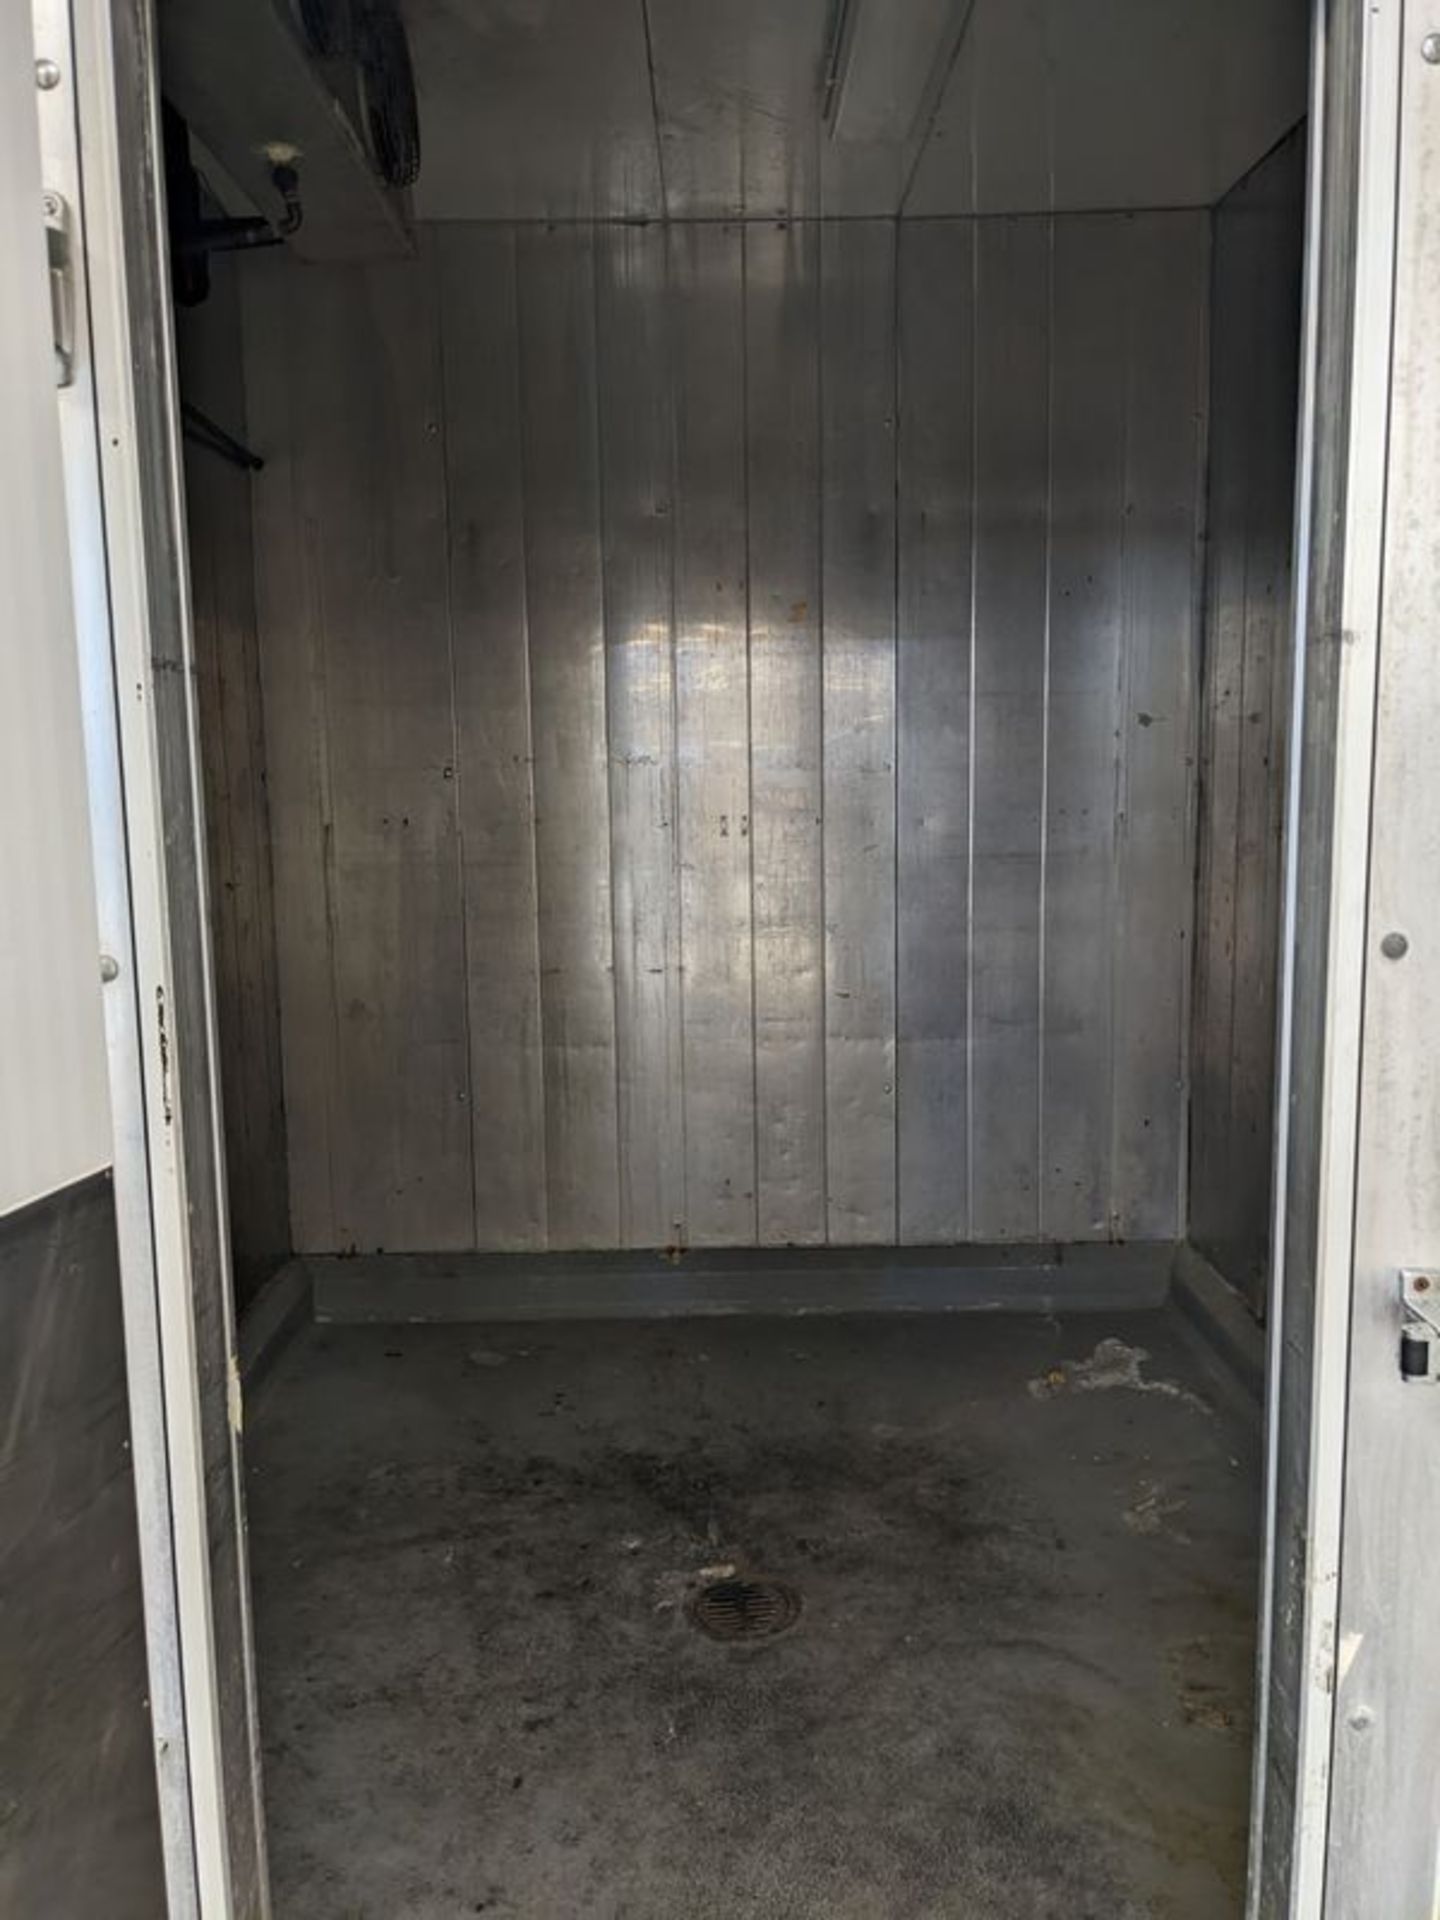 25 x 10 ft Walk in Cooler with 2 Sections, 3 Doors and 1 Side with Stainless Steel Cladded Walls